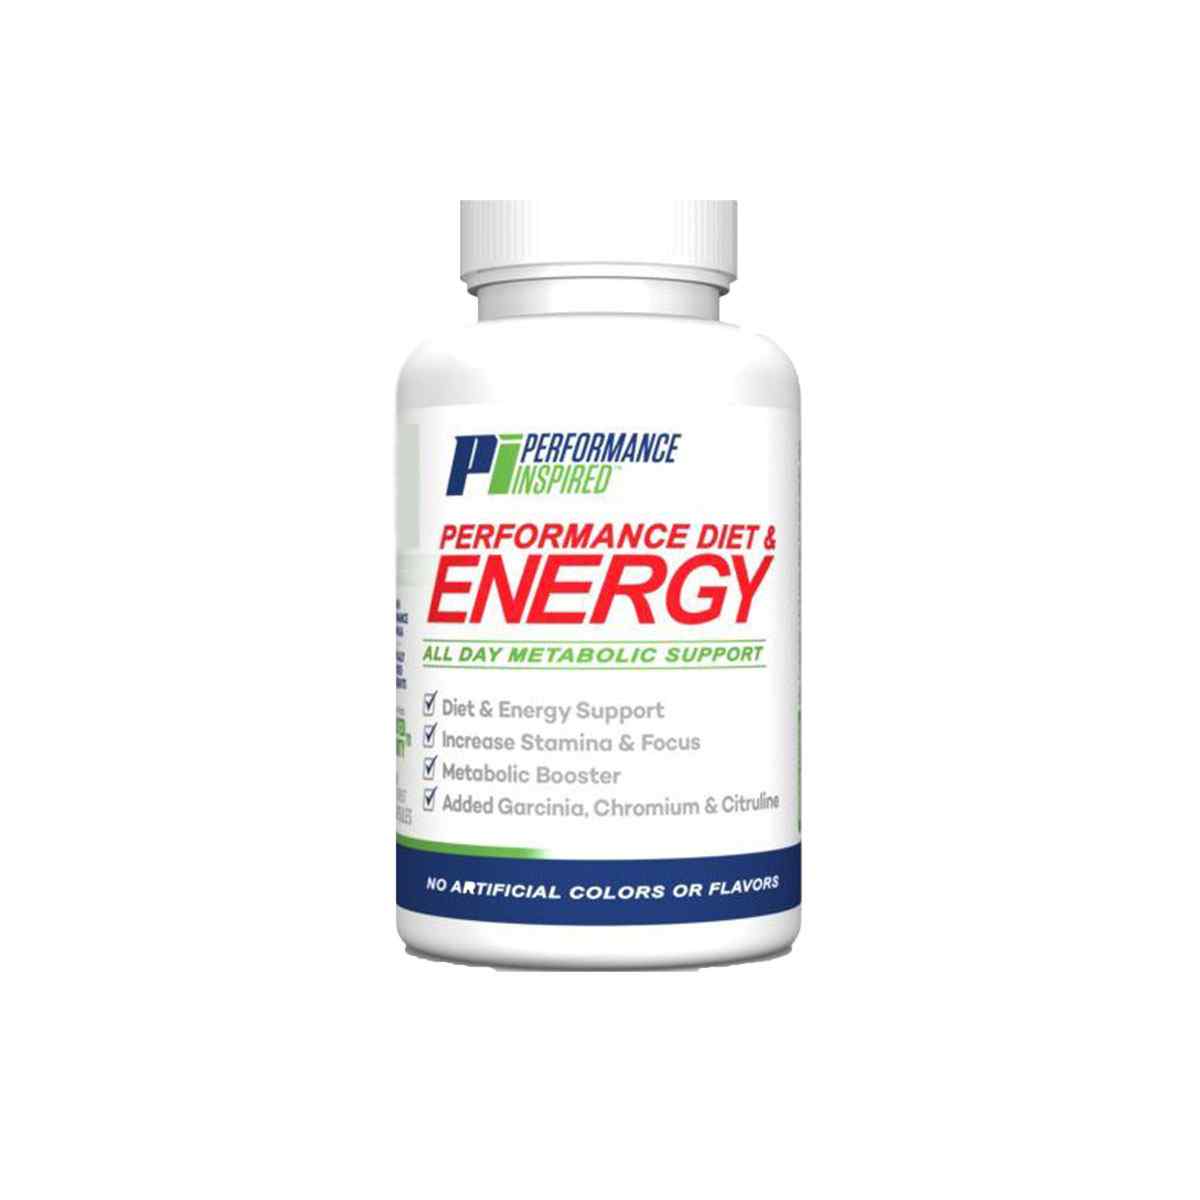 Pre-Workout Energy Formula – Performance Inspired Nutrition